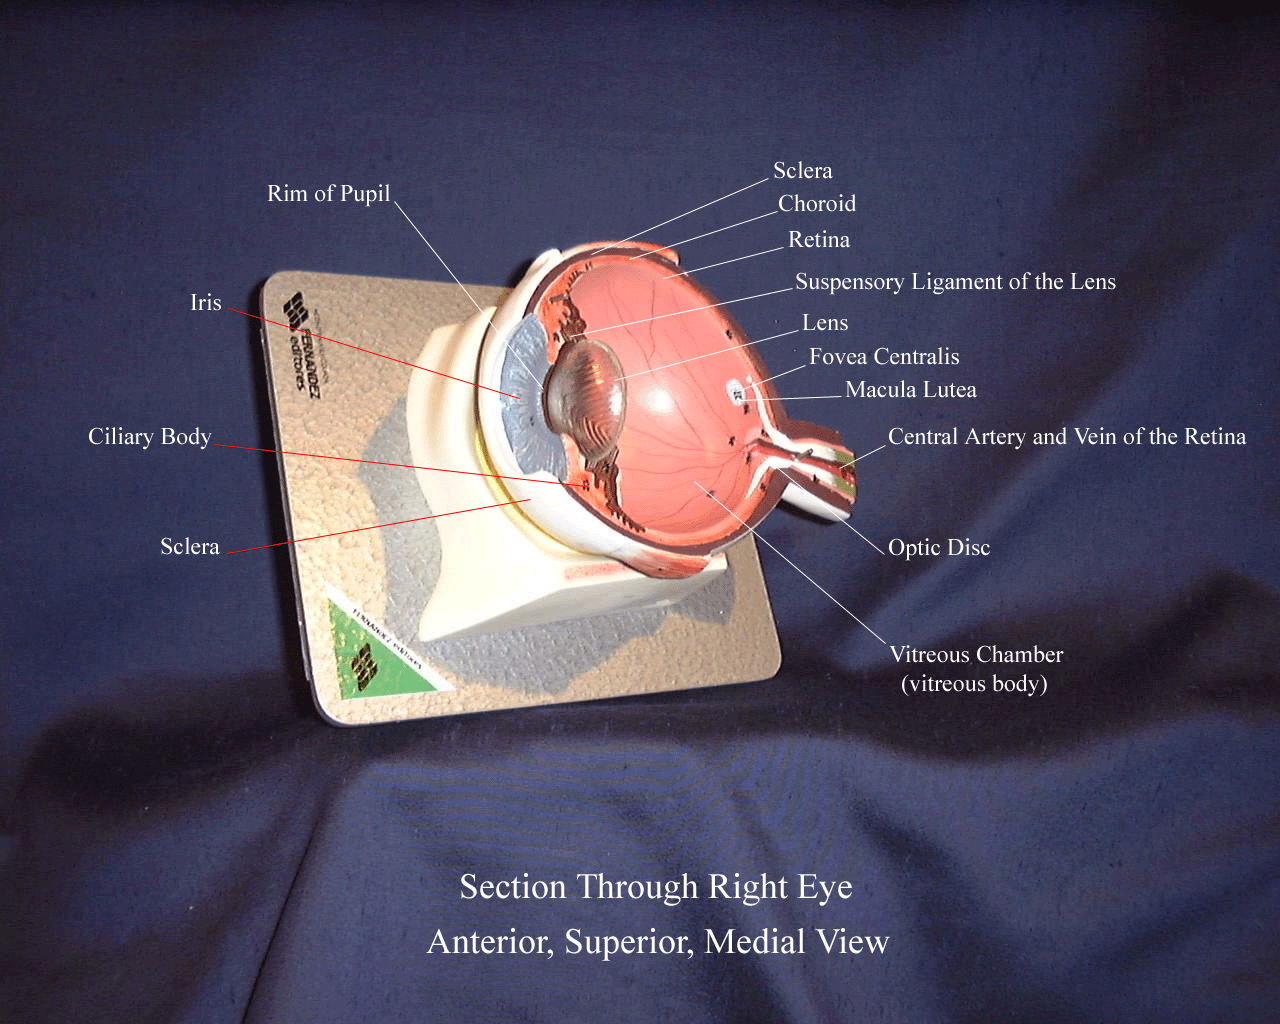 a labeled picture through a sectioned eyeball from an anterior, superior, medial view